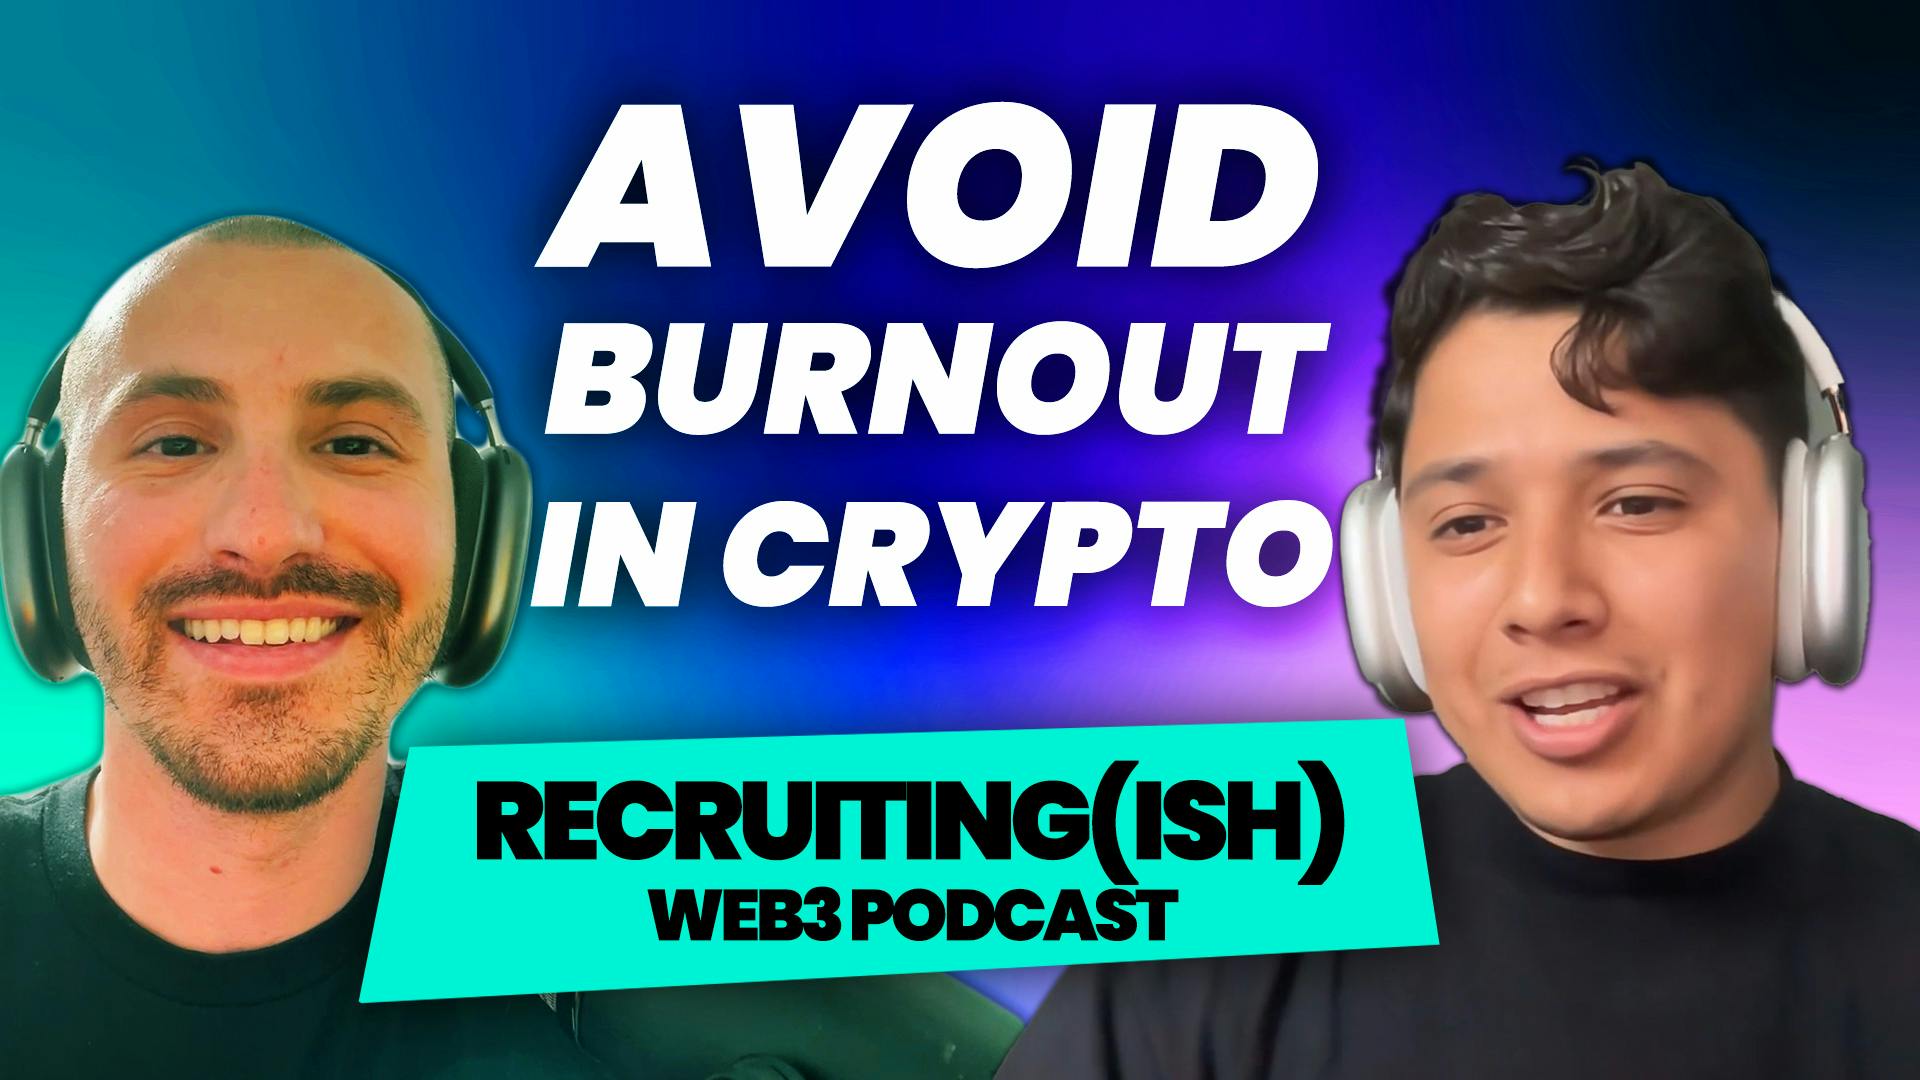 Recruiting(ish) - Working in Crypto and Avoiding Burnout